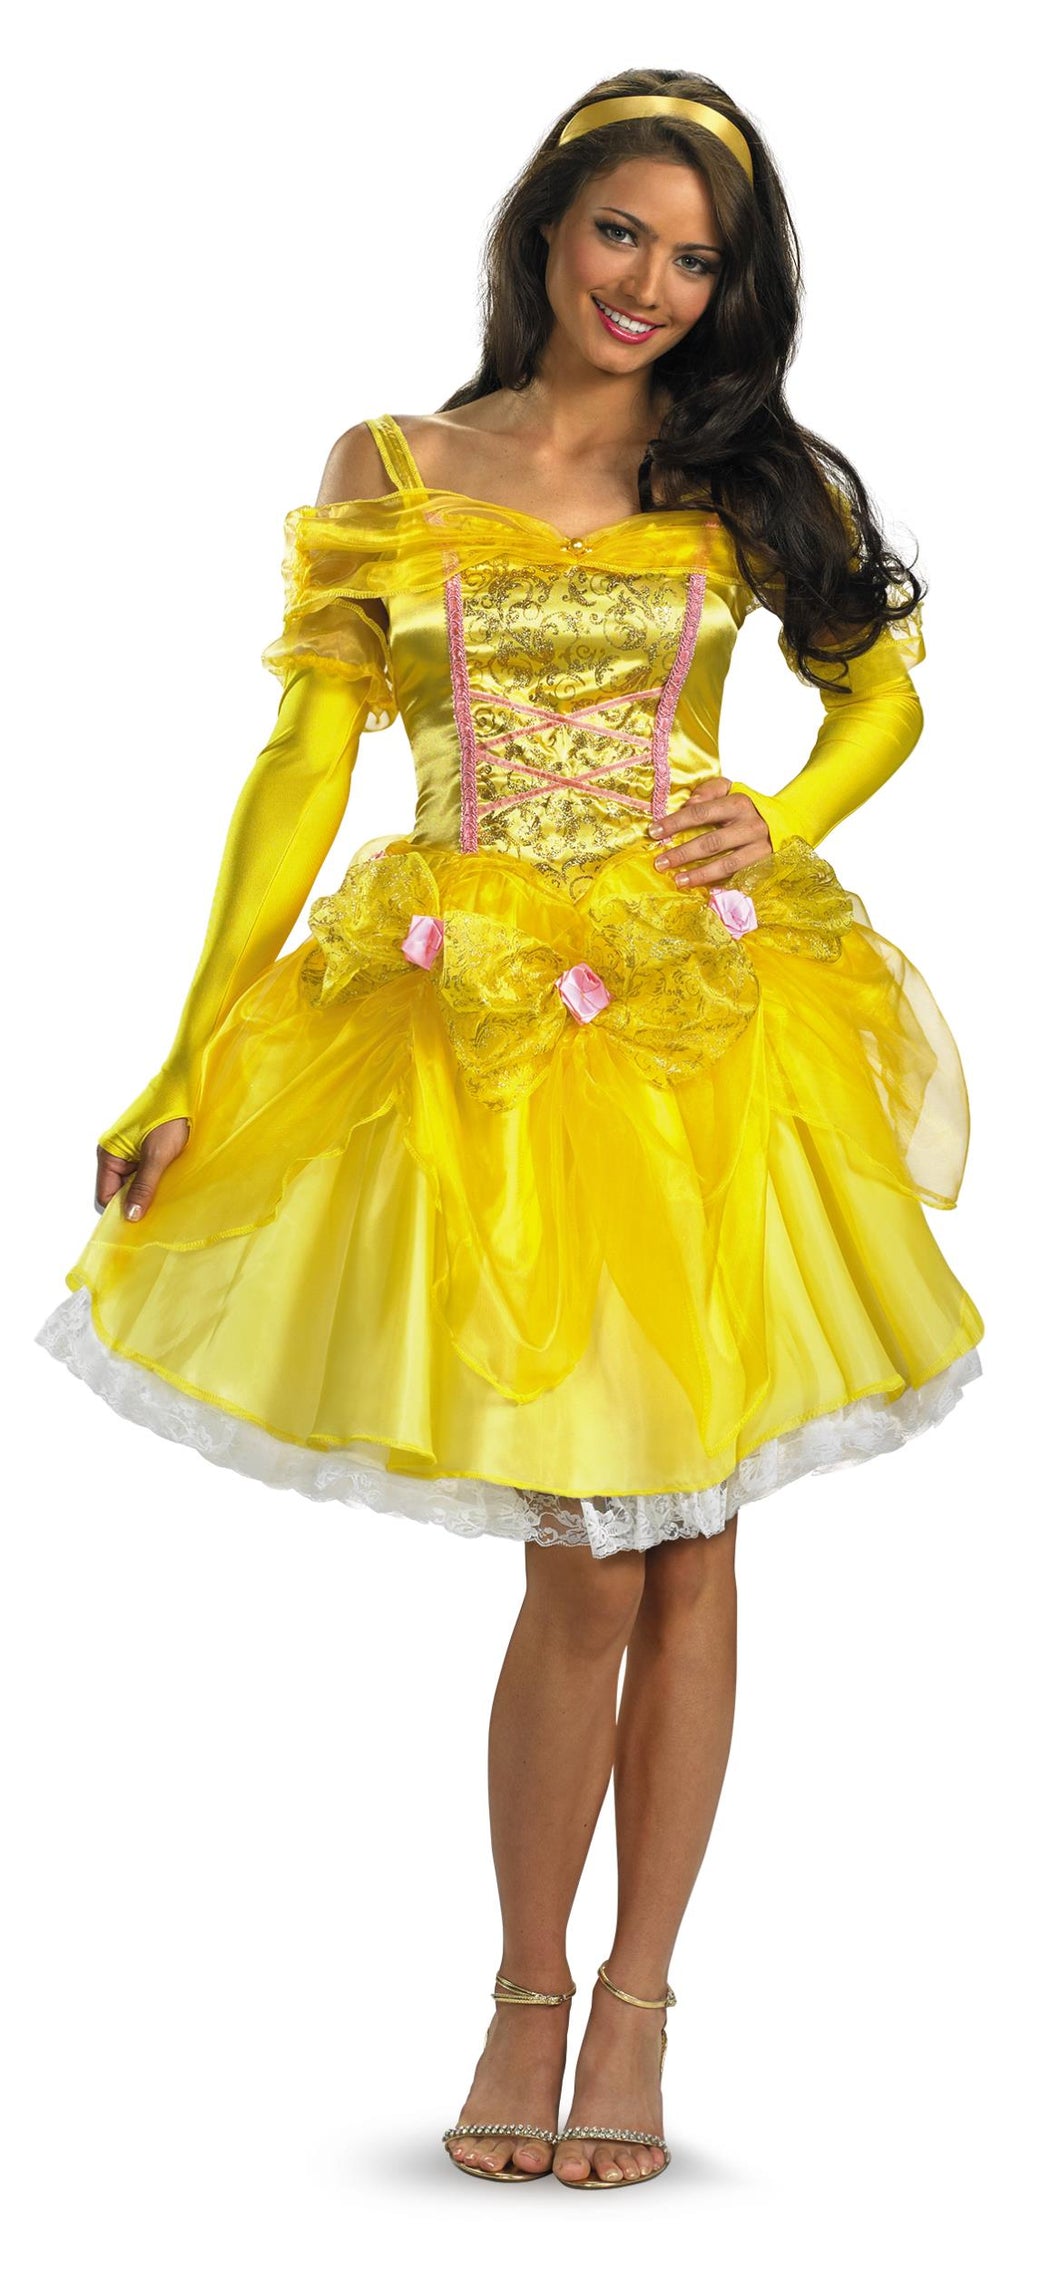 Belle Fab Beauty and the Beast Woman's Costume Adult Medium 8-10